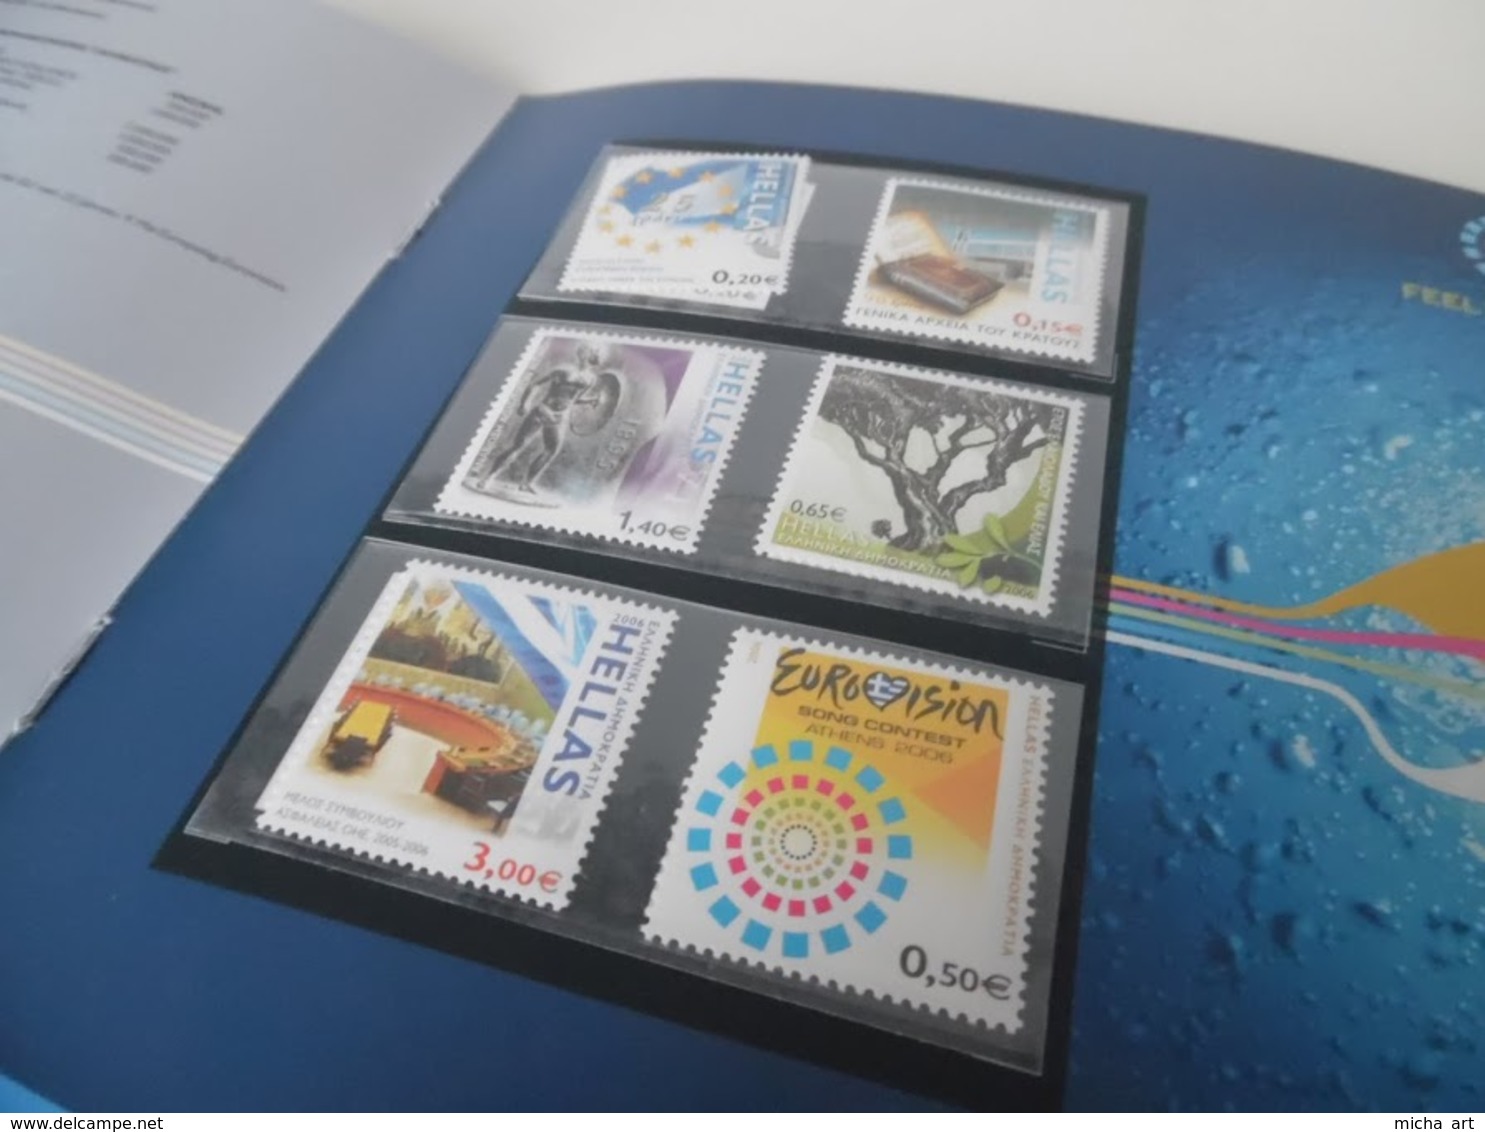 Greece 2006 Album with stamps - Complete Year Album - Official Yearbook All sets MNH